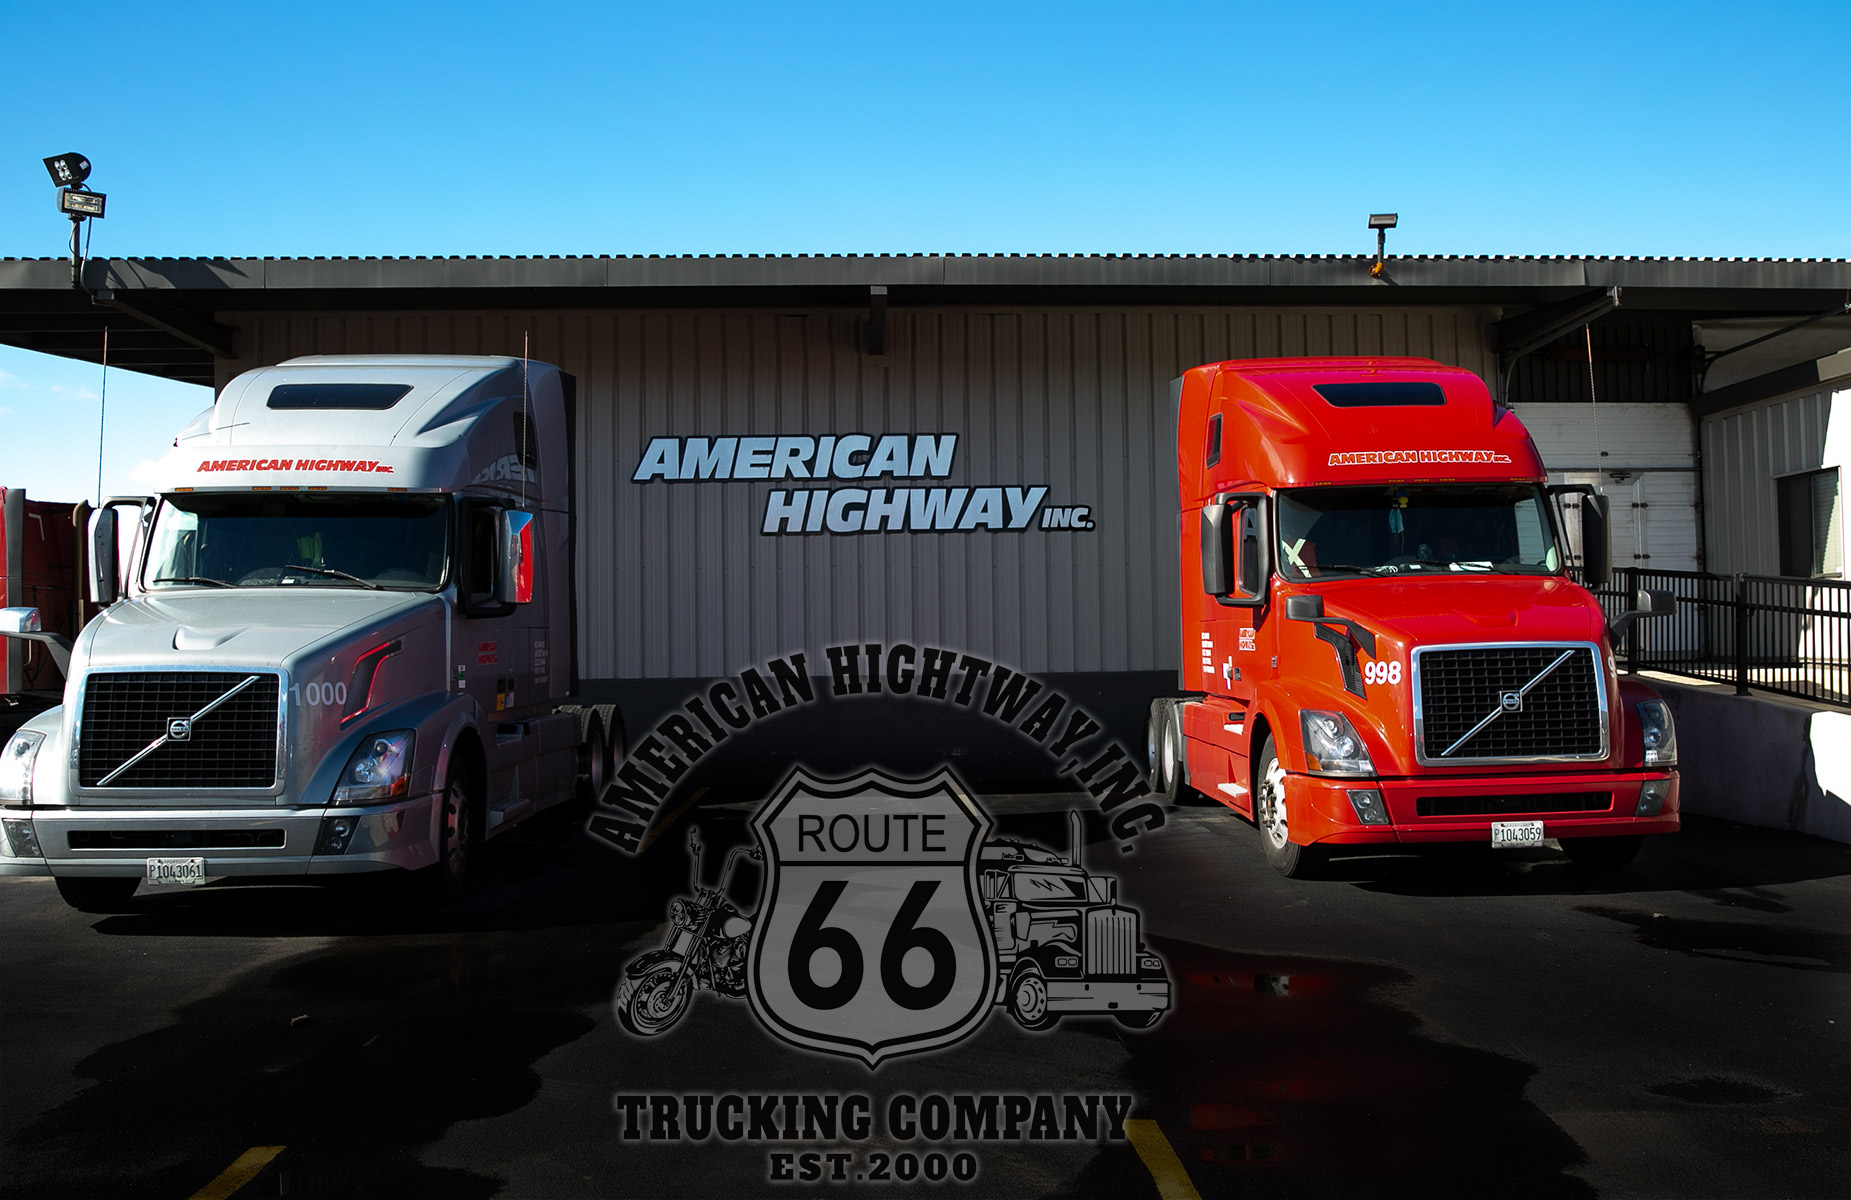 American Highway - Full Service Trucking And Logistics Company - Home